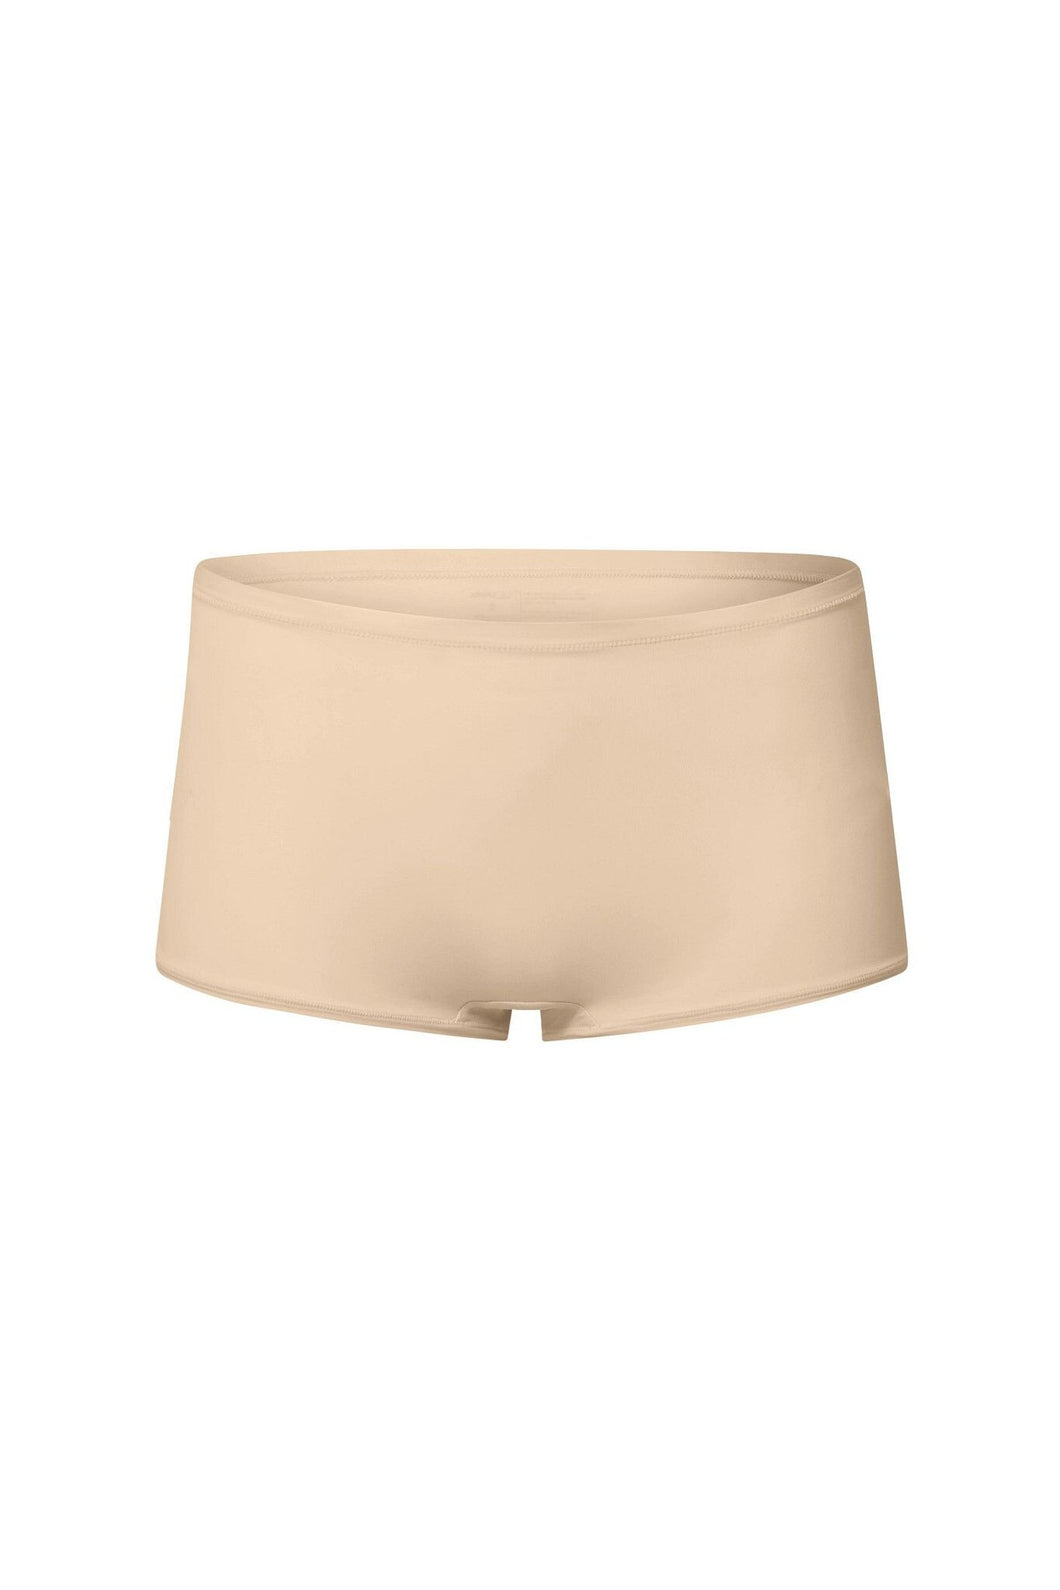 nueskin Risa in color Dawn and shape shortie